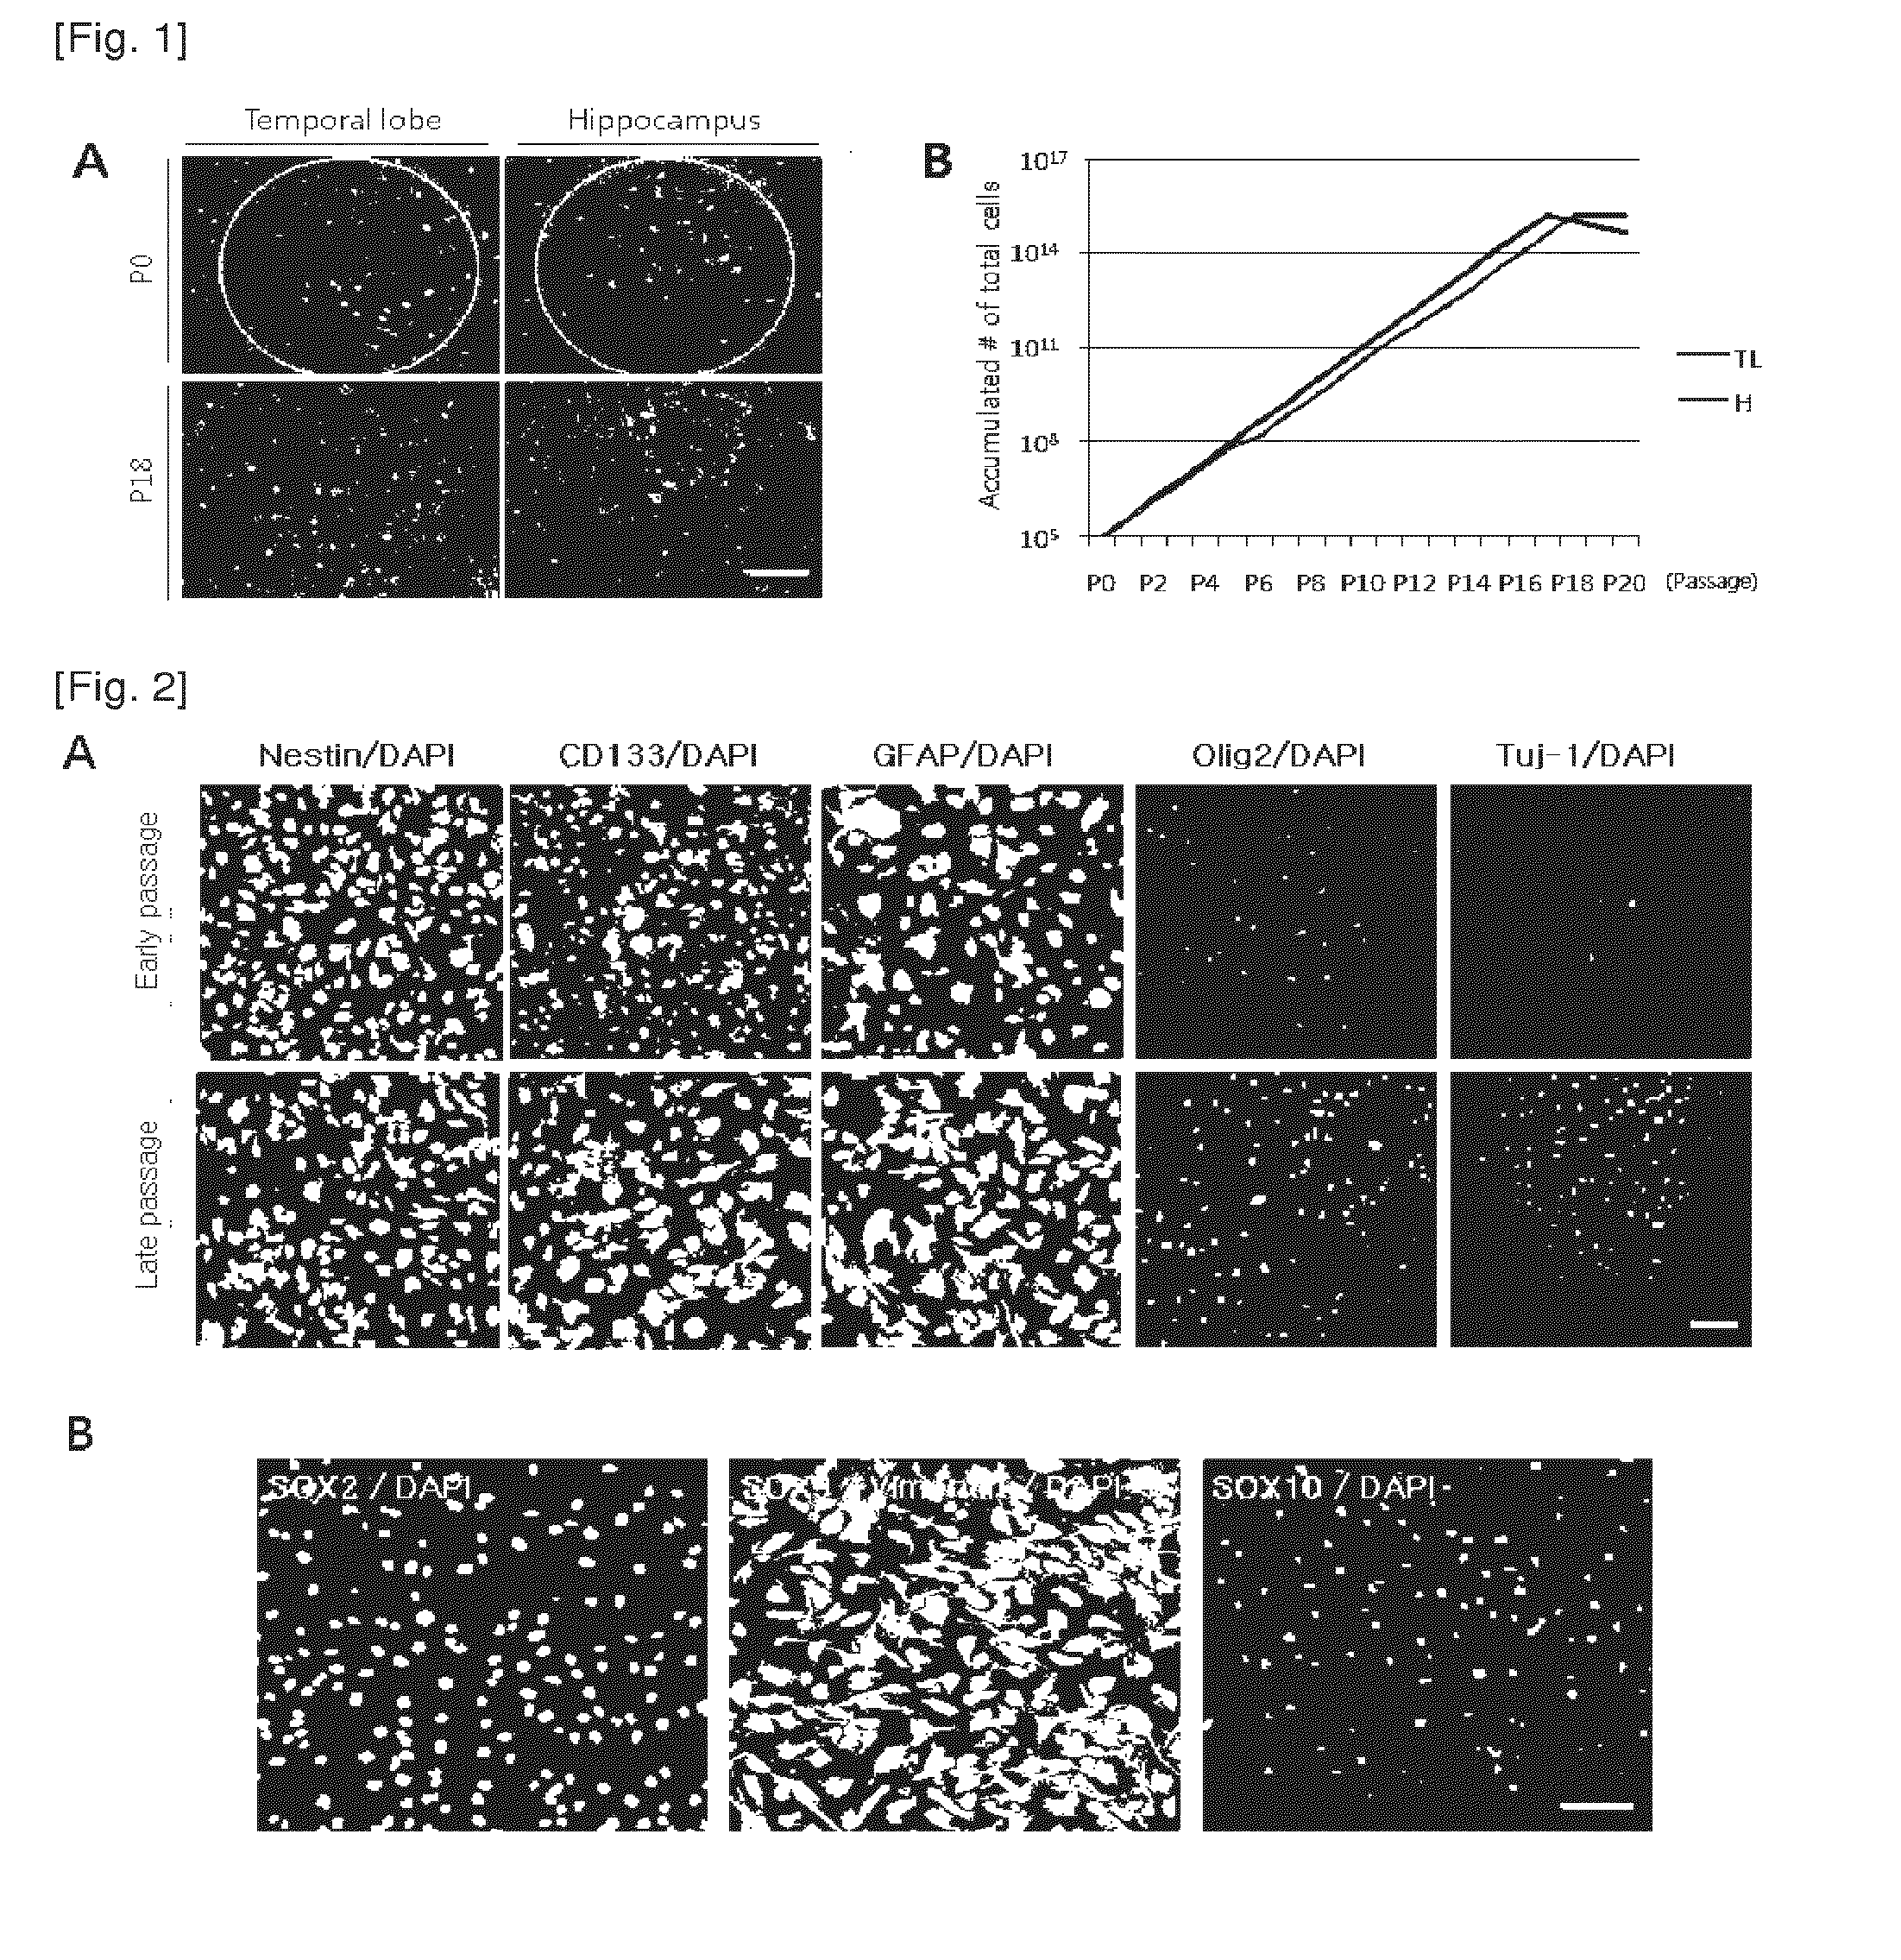 Method for proliferating stem cells by activating c-met/hgf signaling and notch signaling